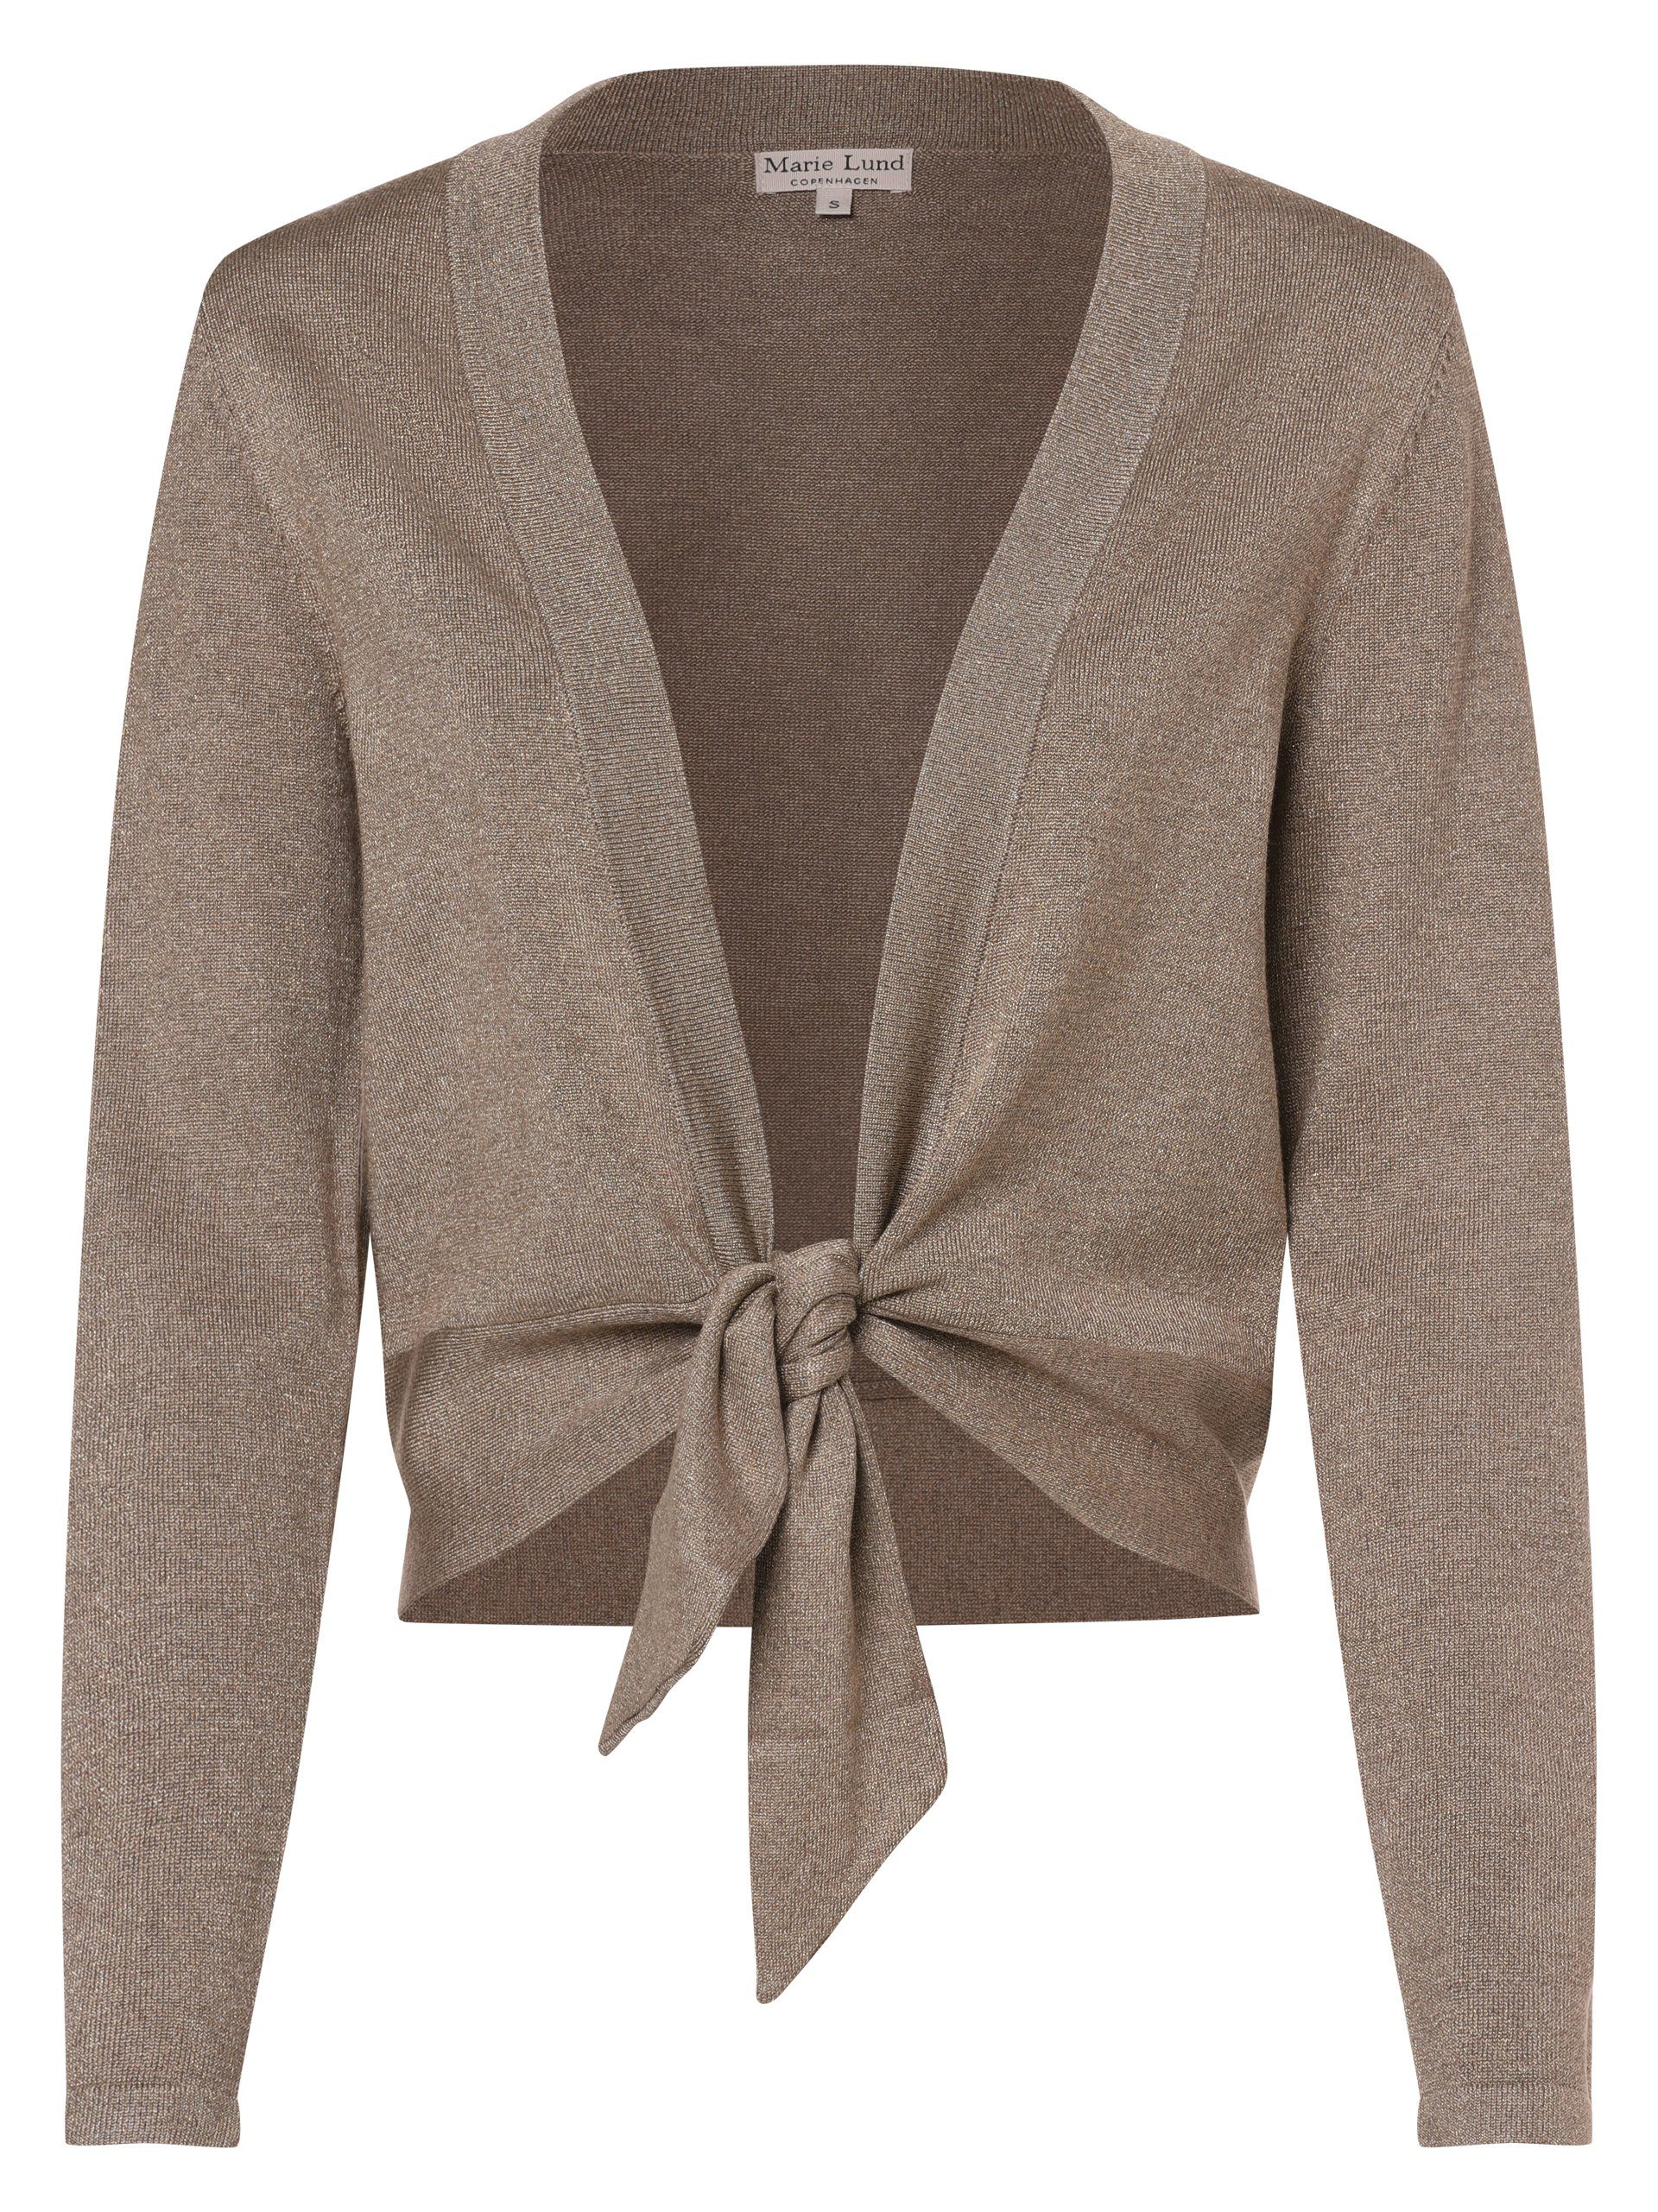 Marie Lund Strickjacke taupe gold | Cardigans